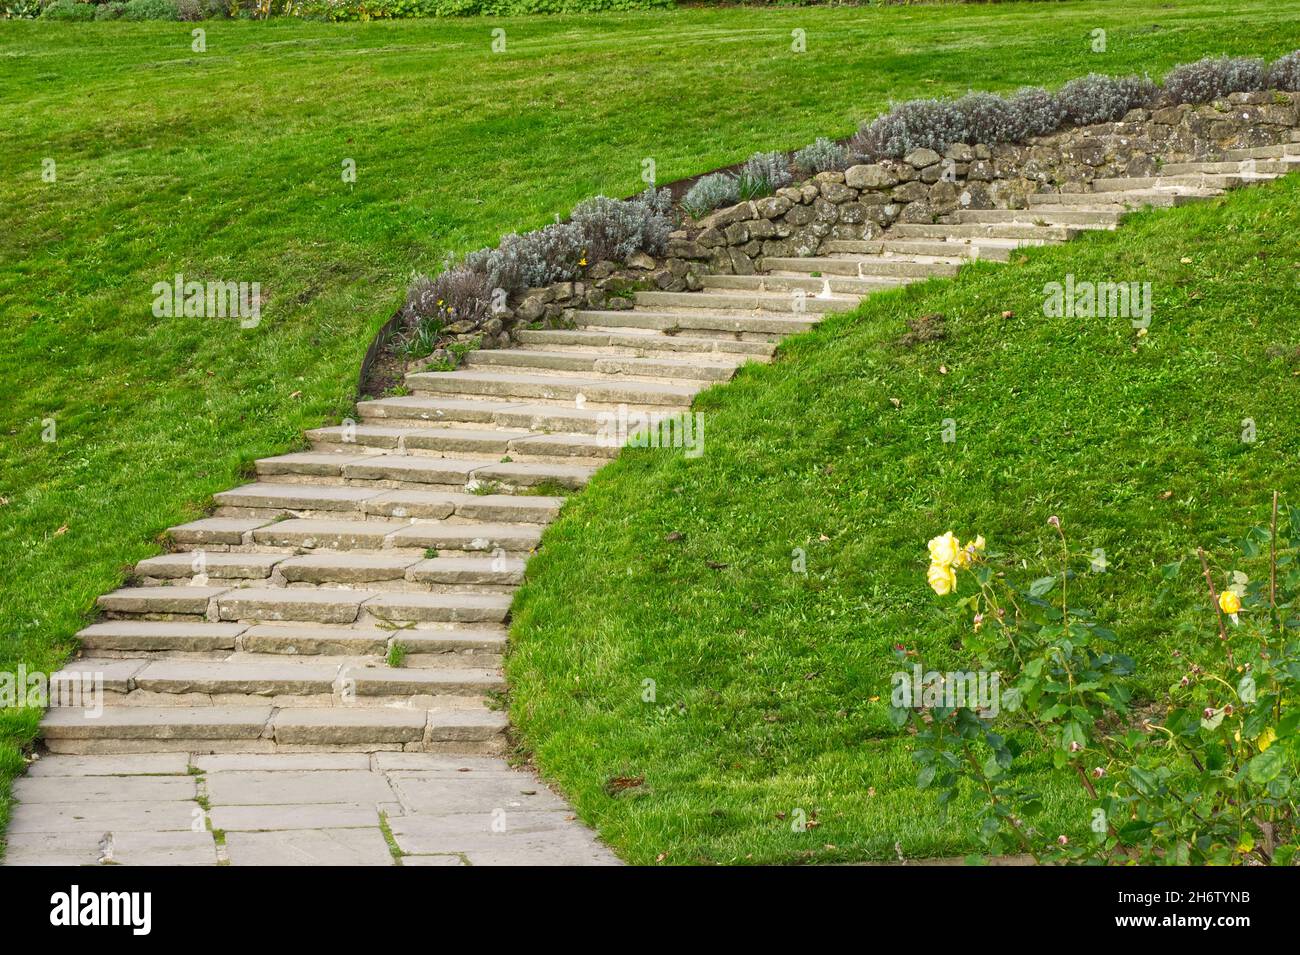 Garden stairway made of stone and curving up hill on grass lawn. Stock Photo